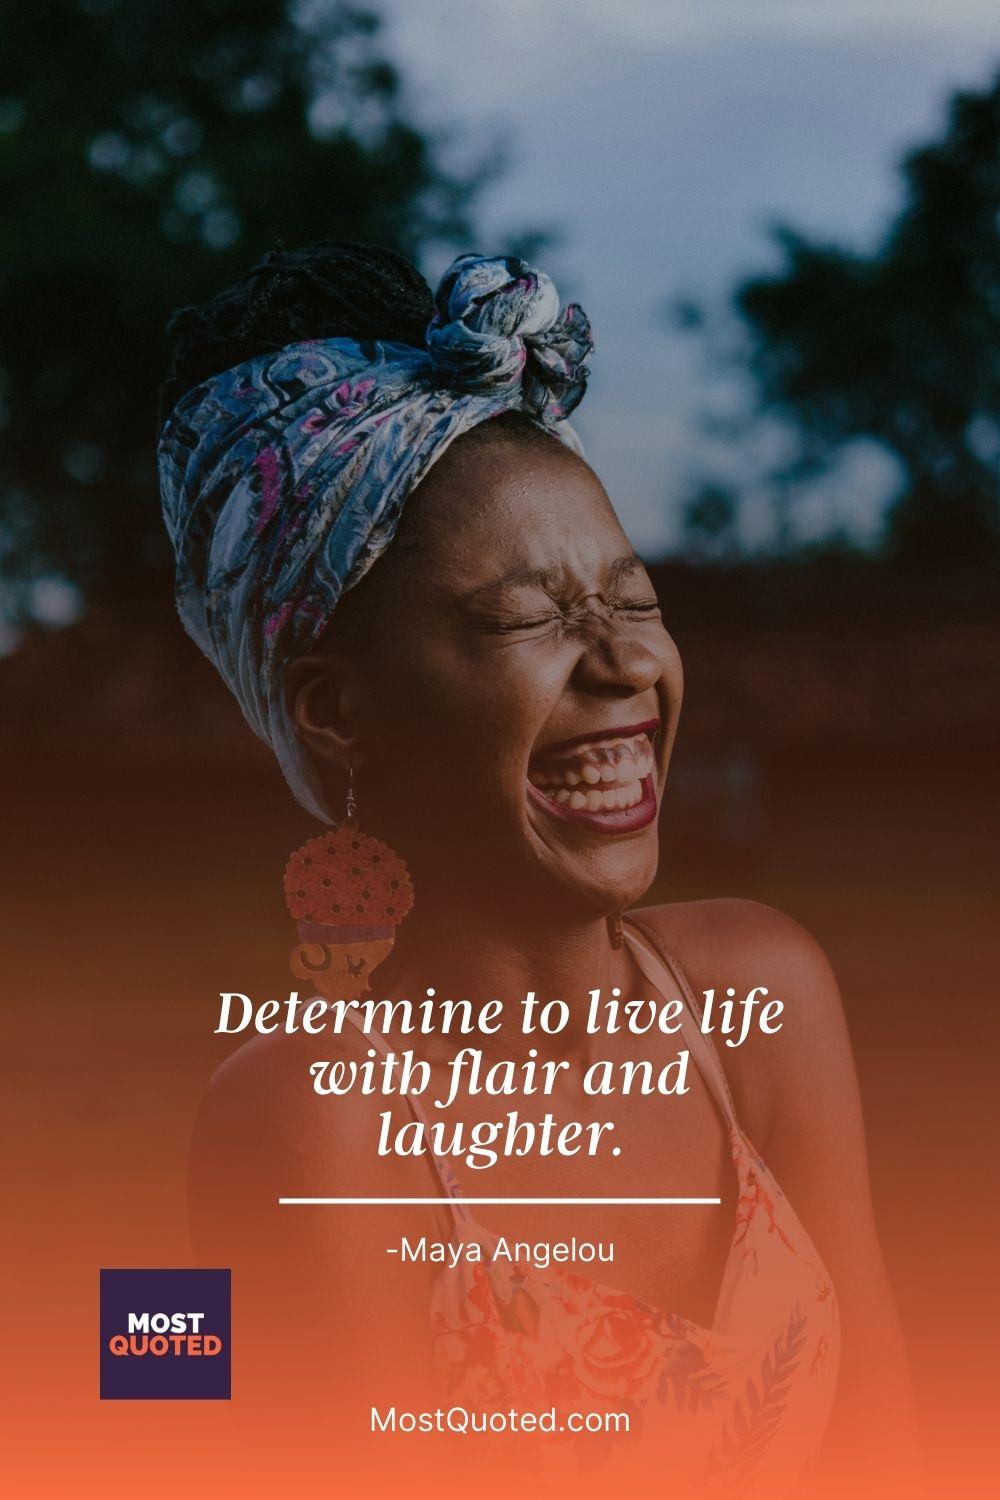 Determine to live life with flair and laughter. - Maya Angelou